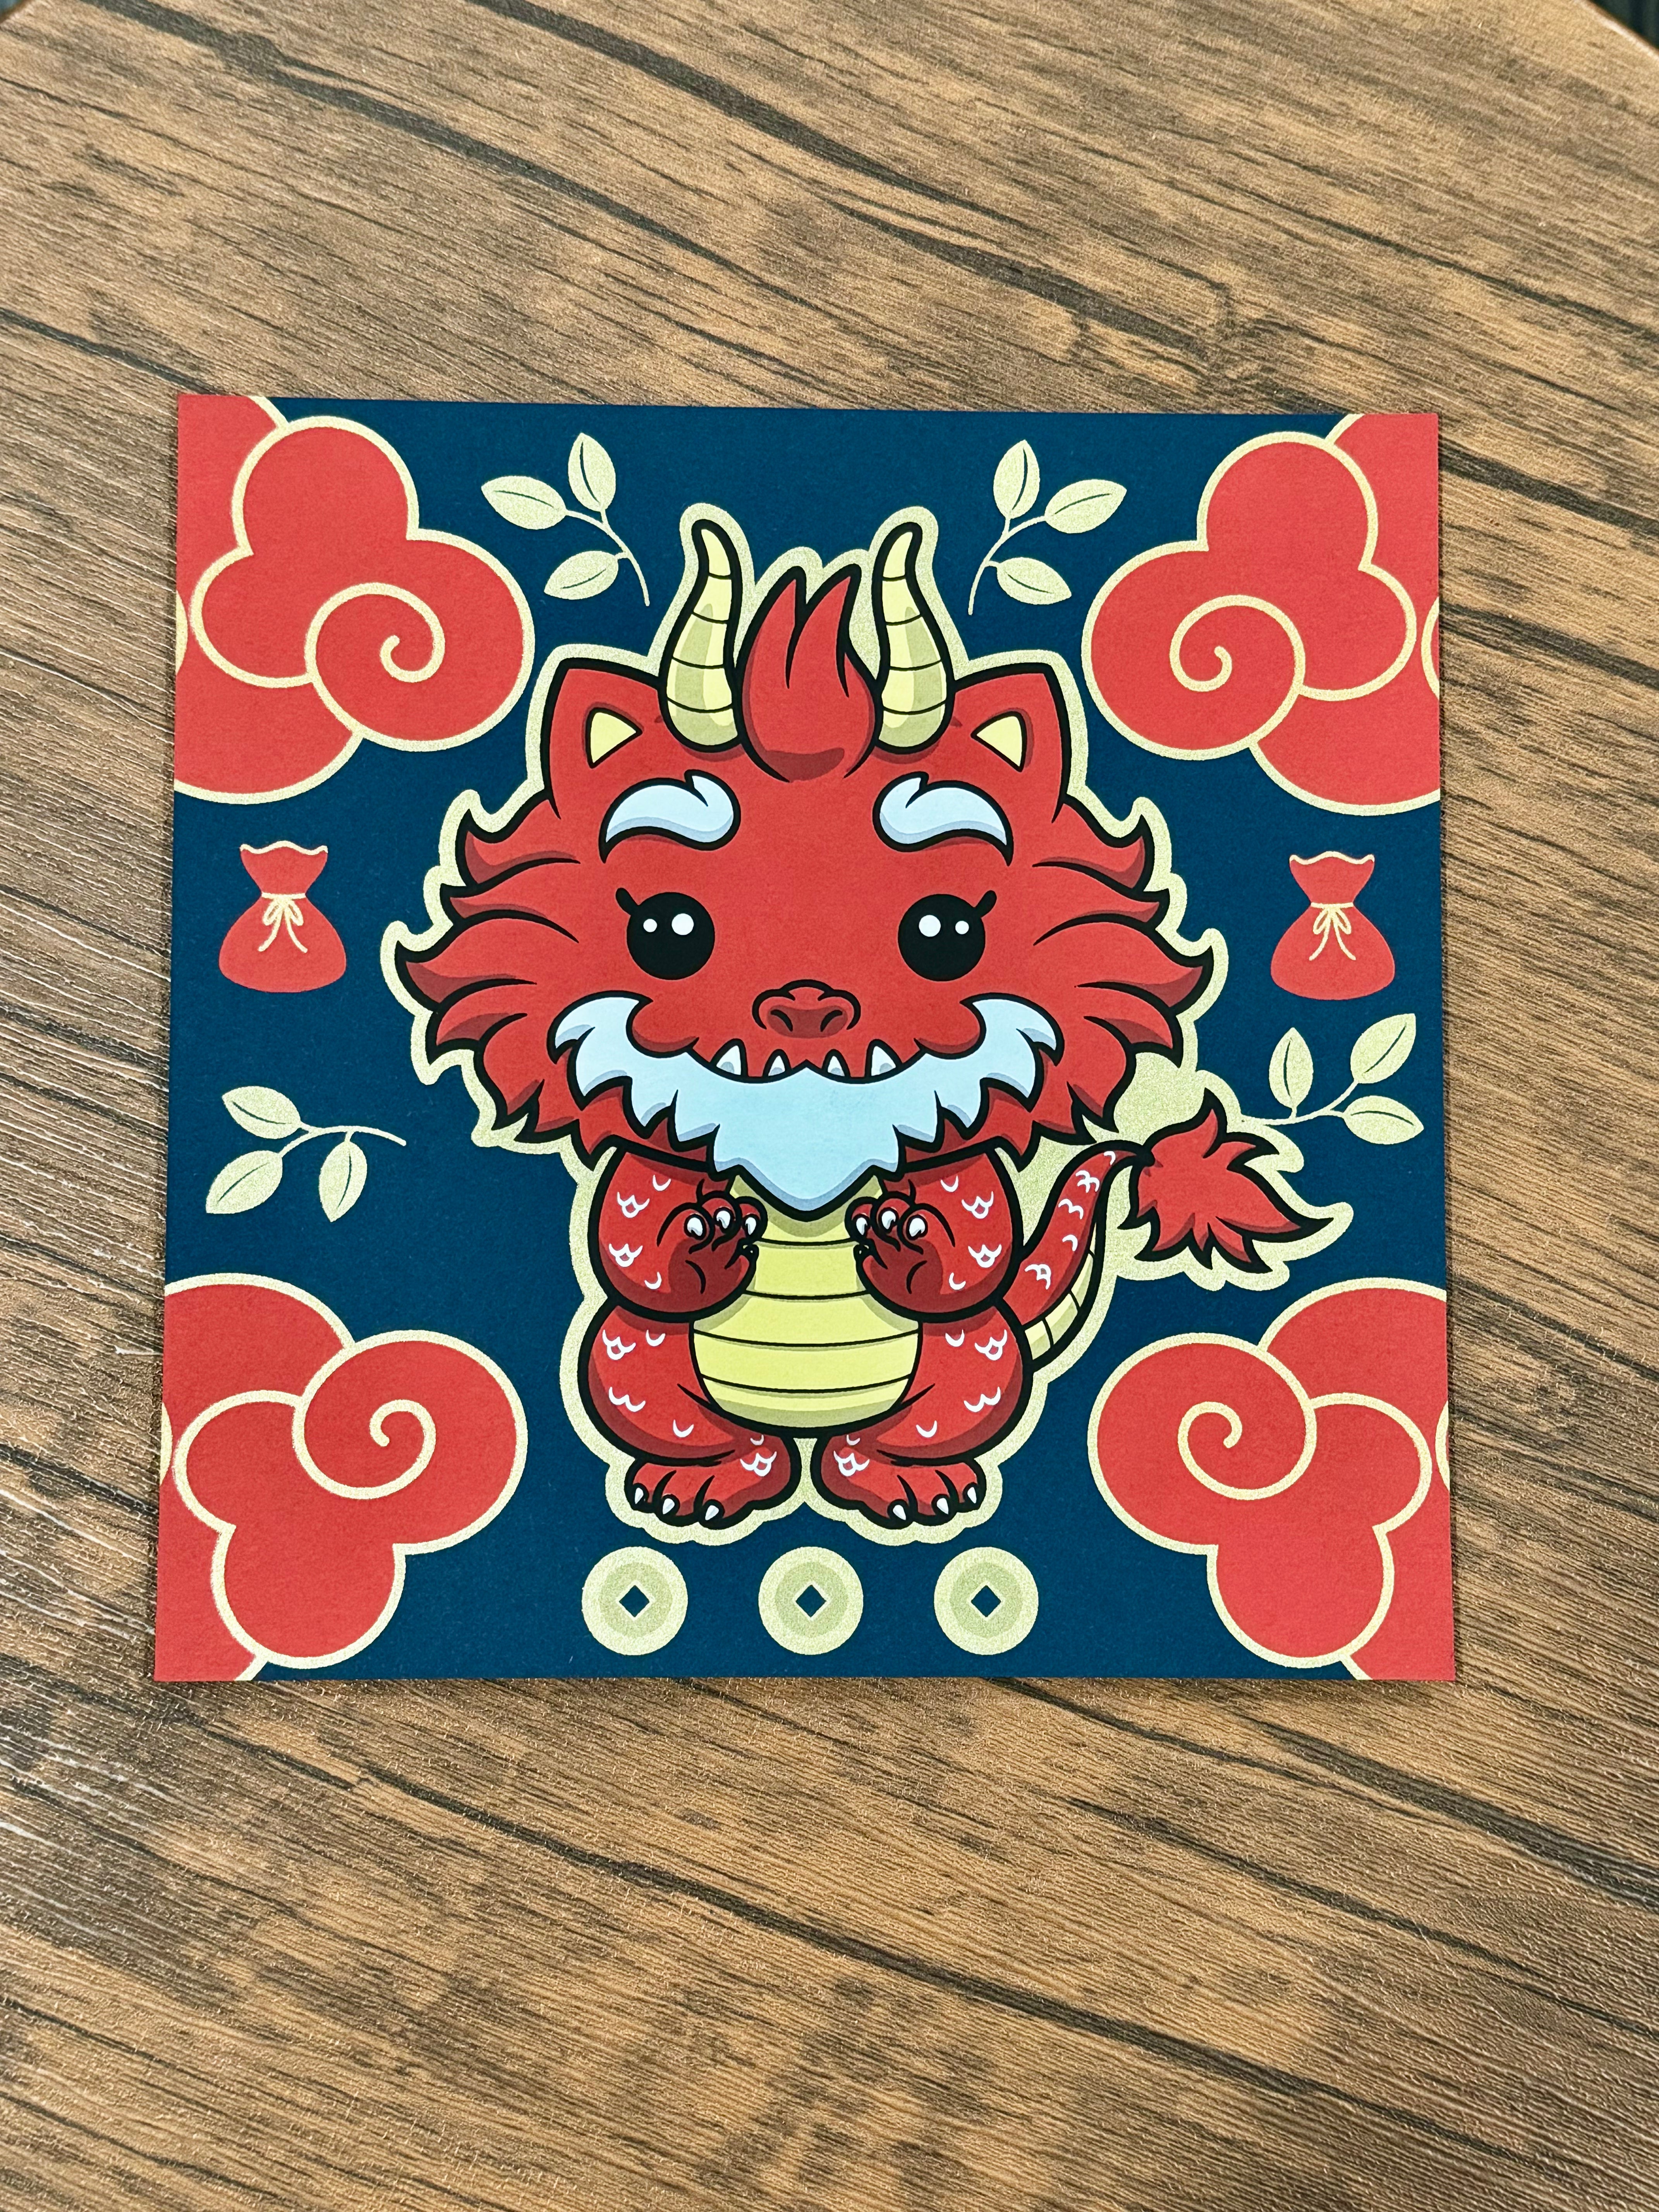 Cartoon dragon on square, white circle with square, red bag with cord, Year of the Dragon Lucky Bag items.